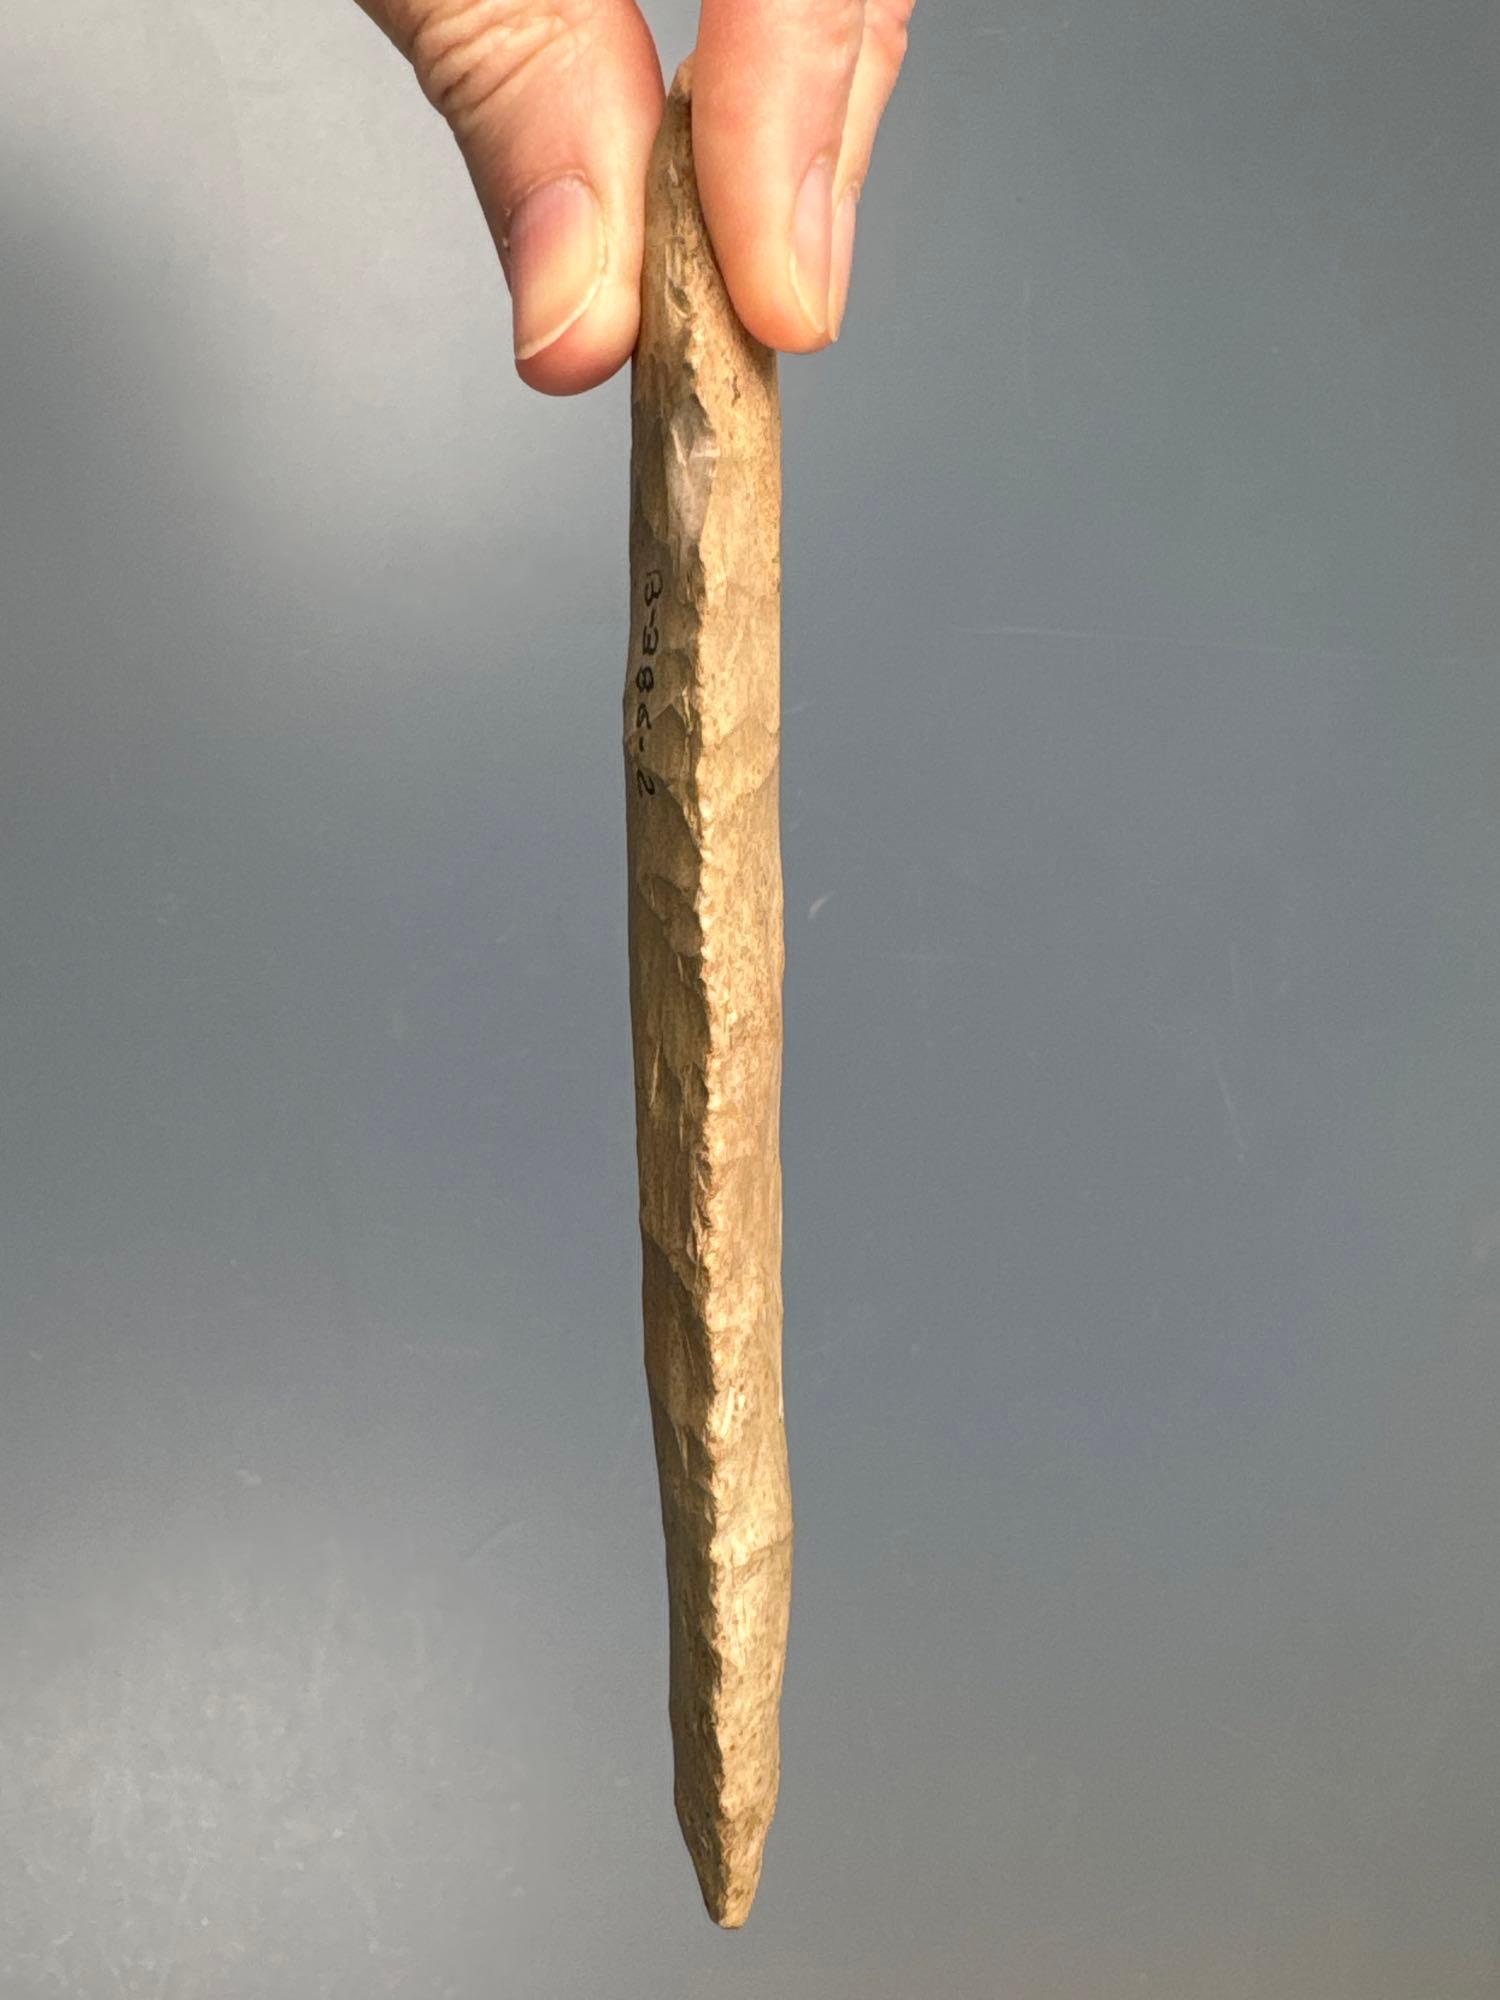 XL 6 1/8" Stemmed Point, Found in the Midwest, Large Example, Overall Nice Condition